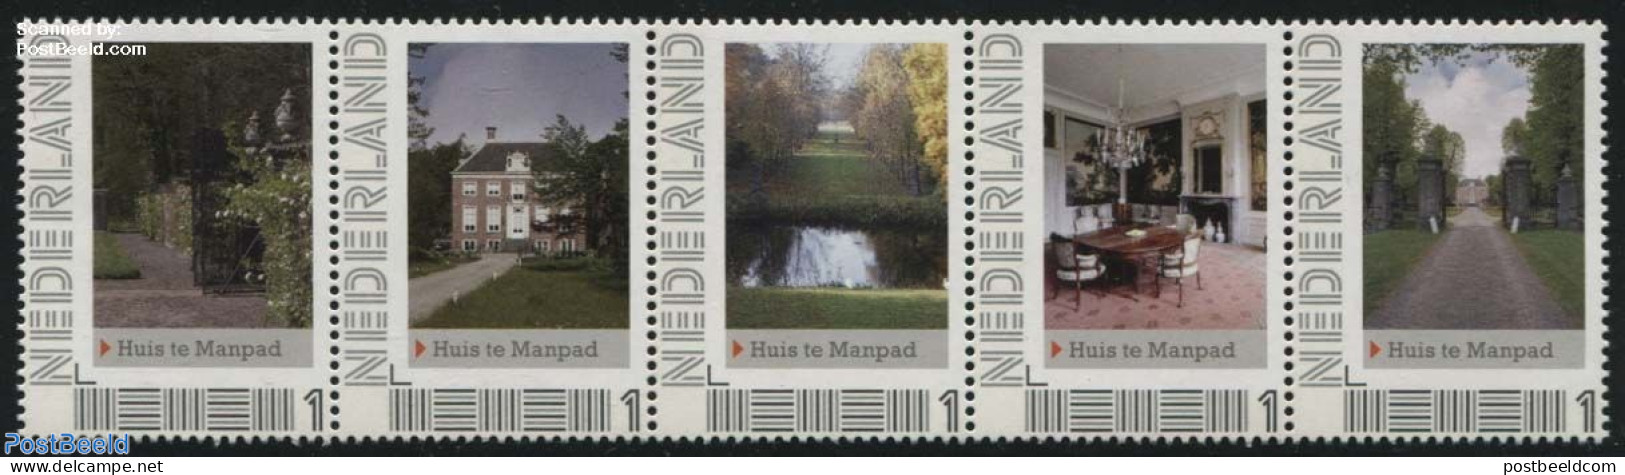 Netherlands - Personal Stamps TNT/PNL 2012 Huis Te Manpad 5v [::::], Mint NH, Castles & Fortifications - Castles